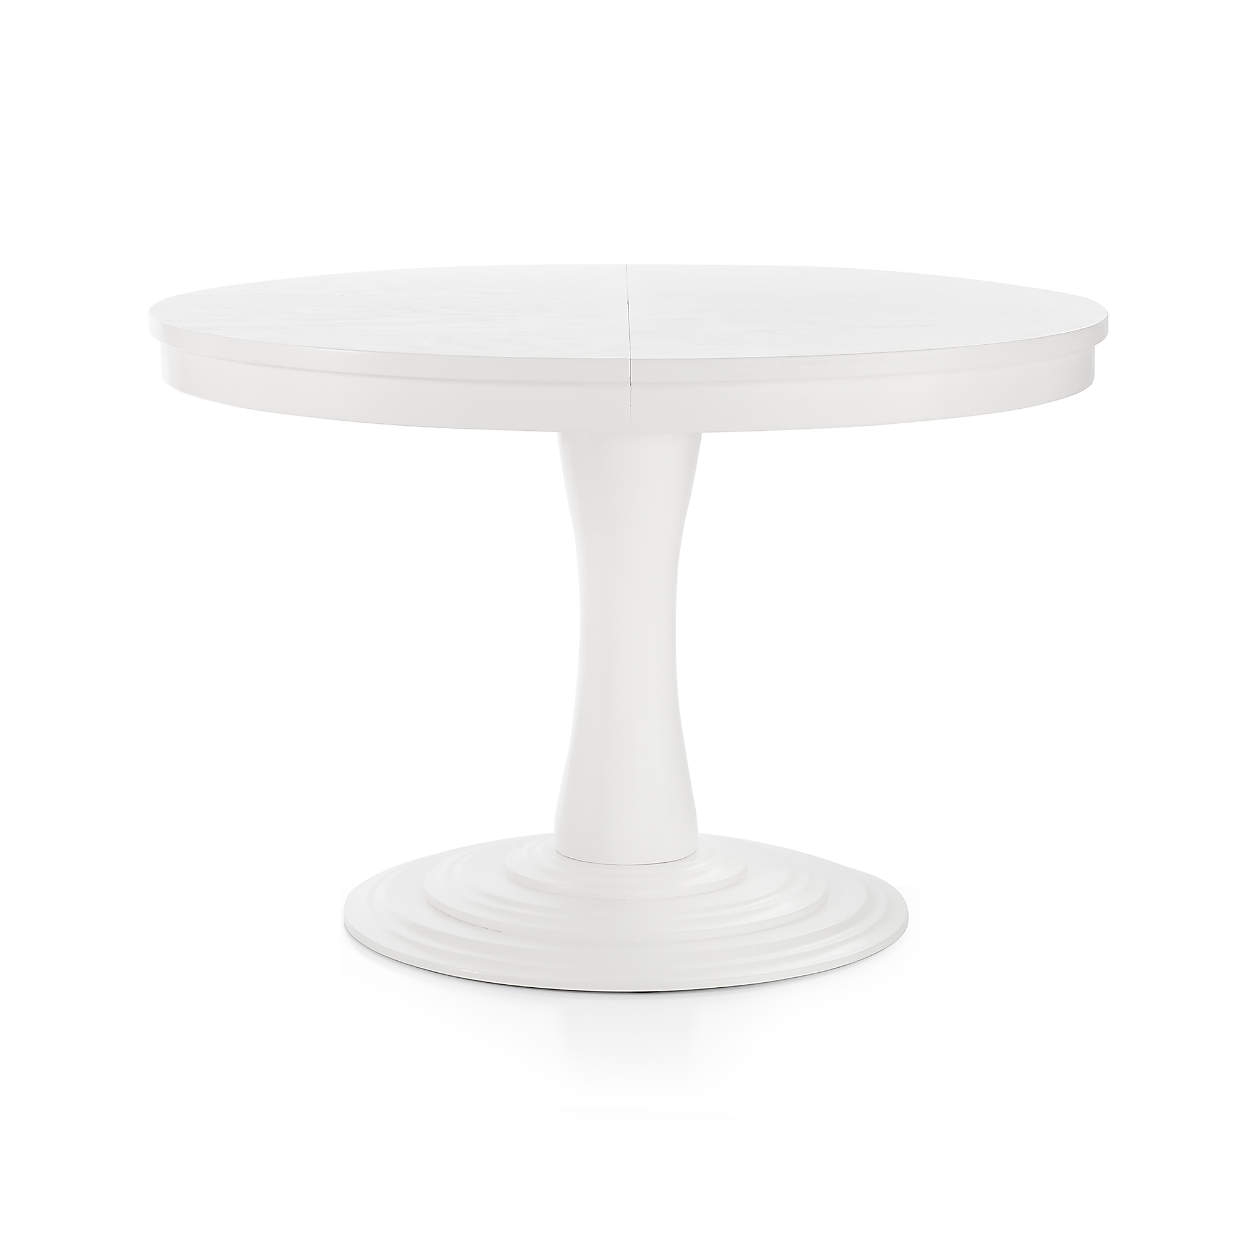 Aniston White 45" Round Extension Dining Table - Image 5